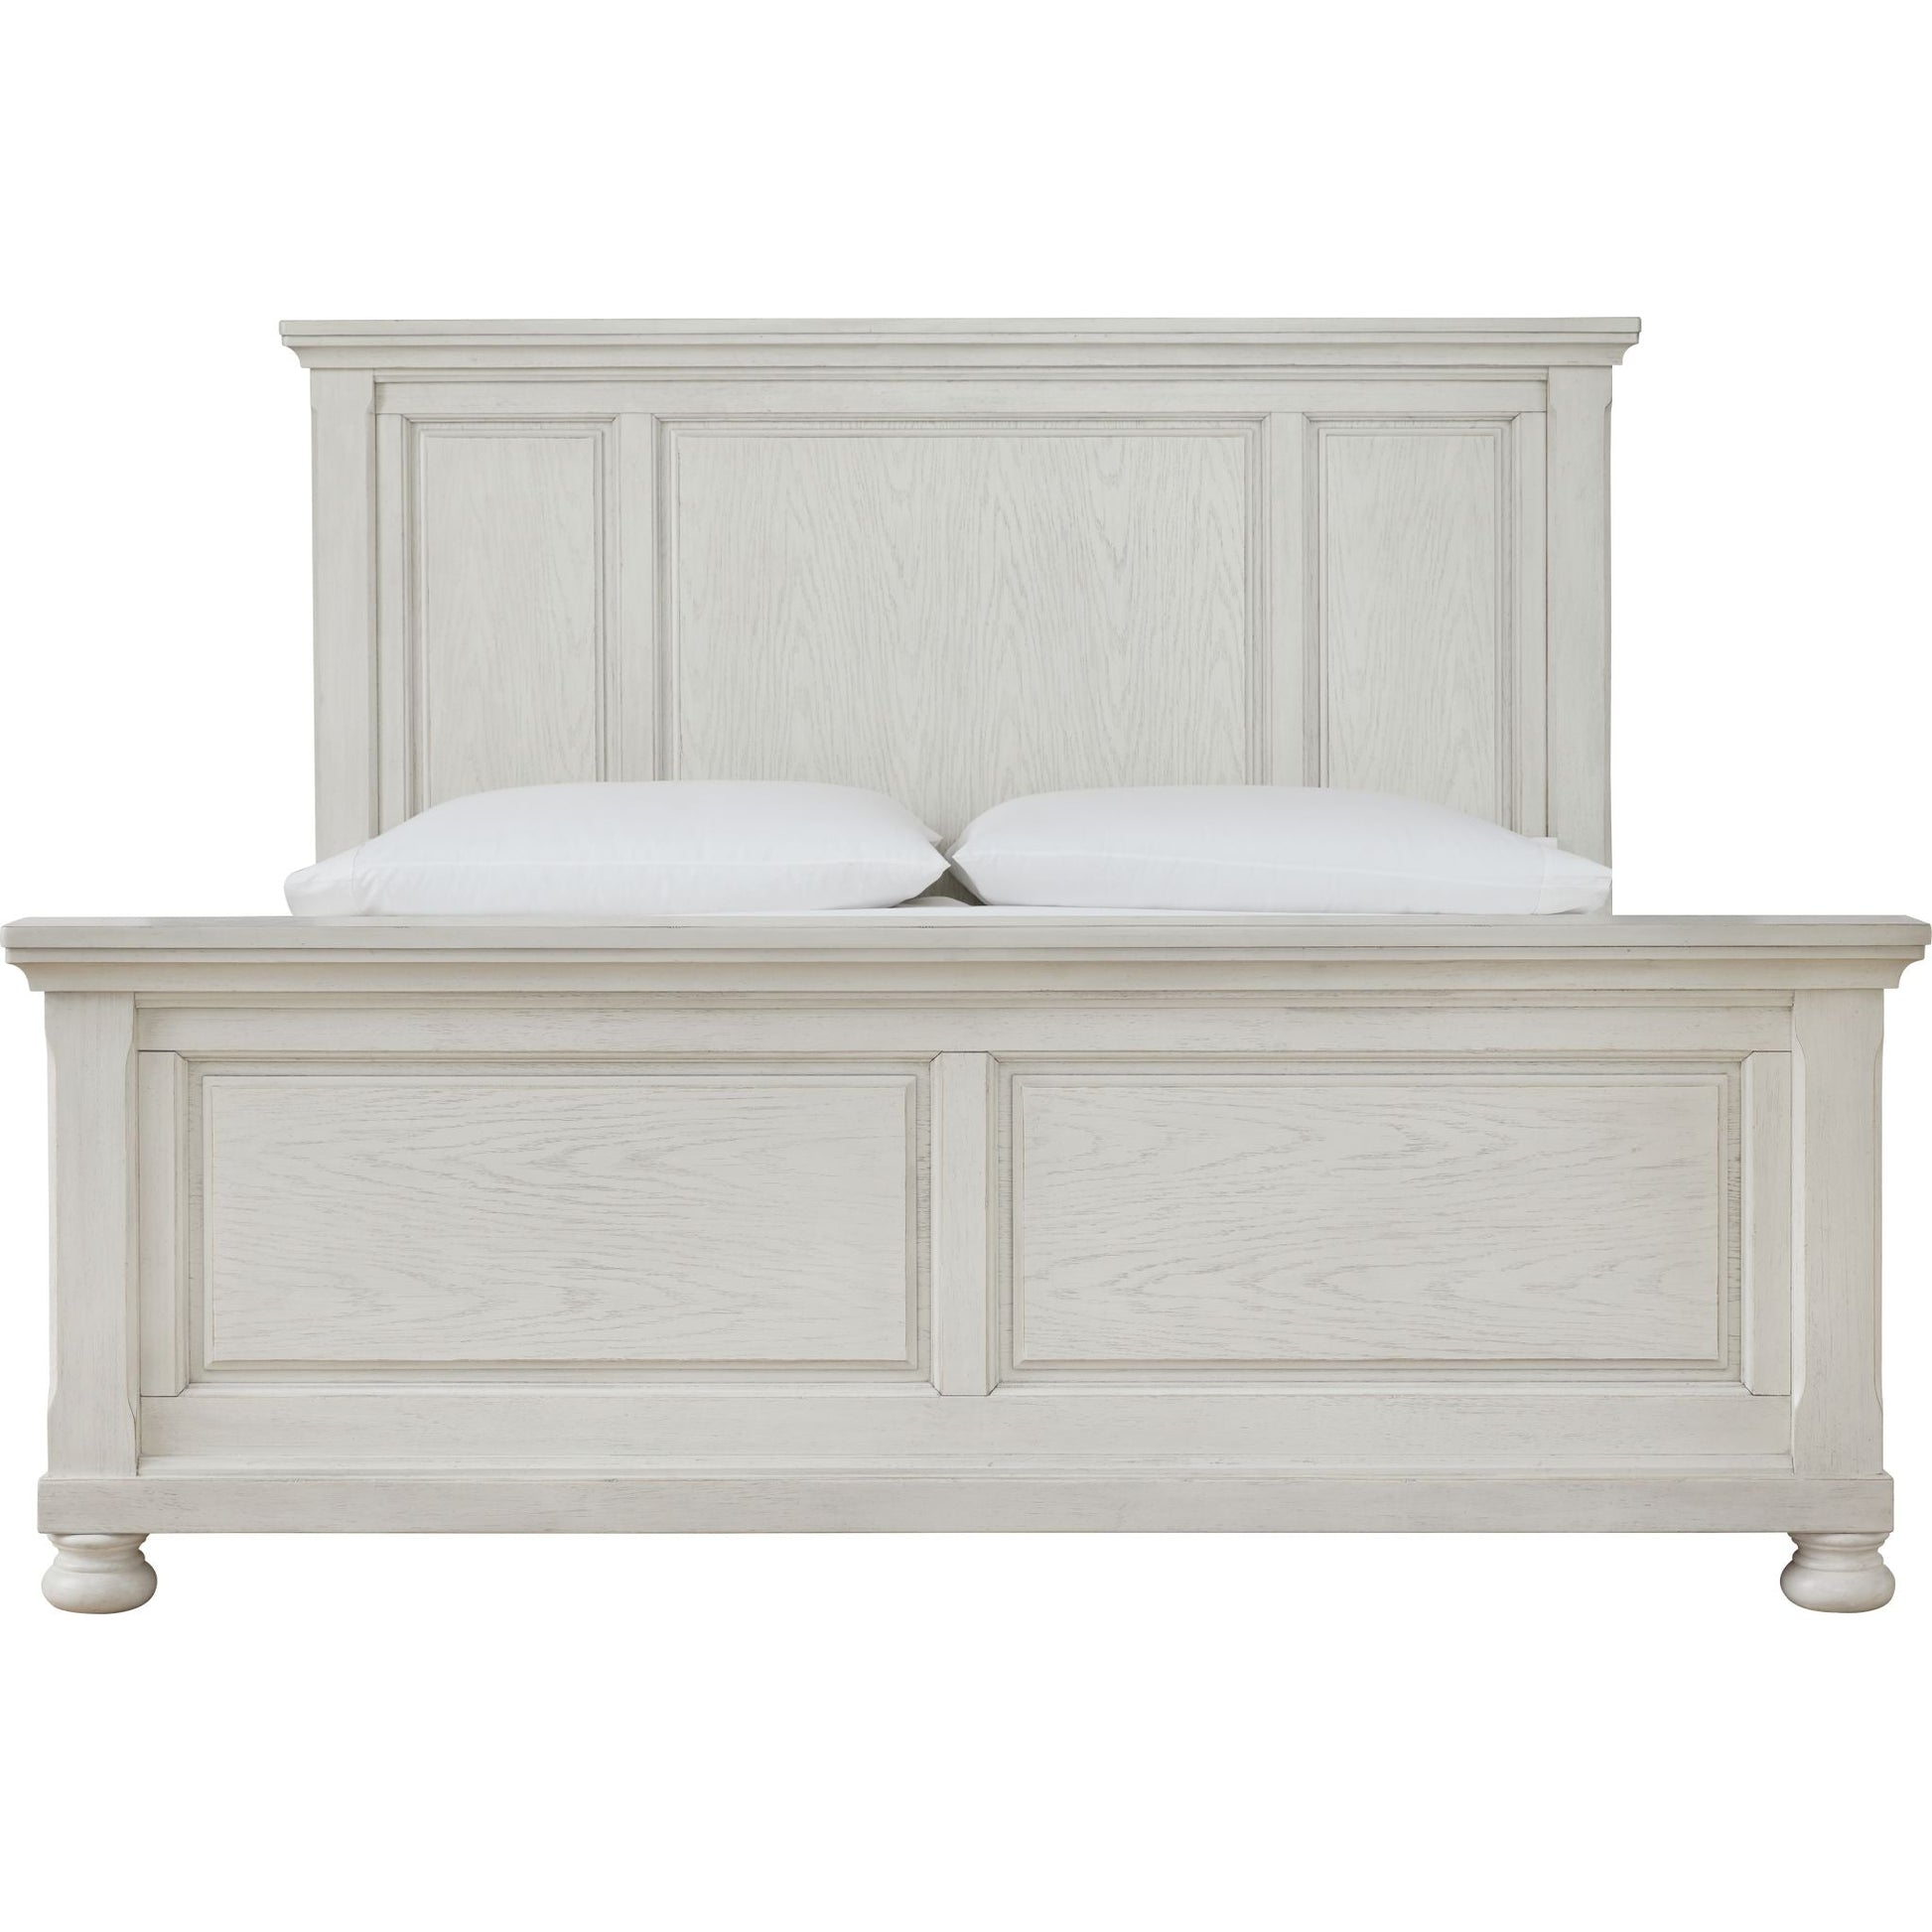 Robbinsdale 3 Piece King Panel Bed - Antique White